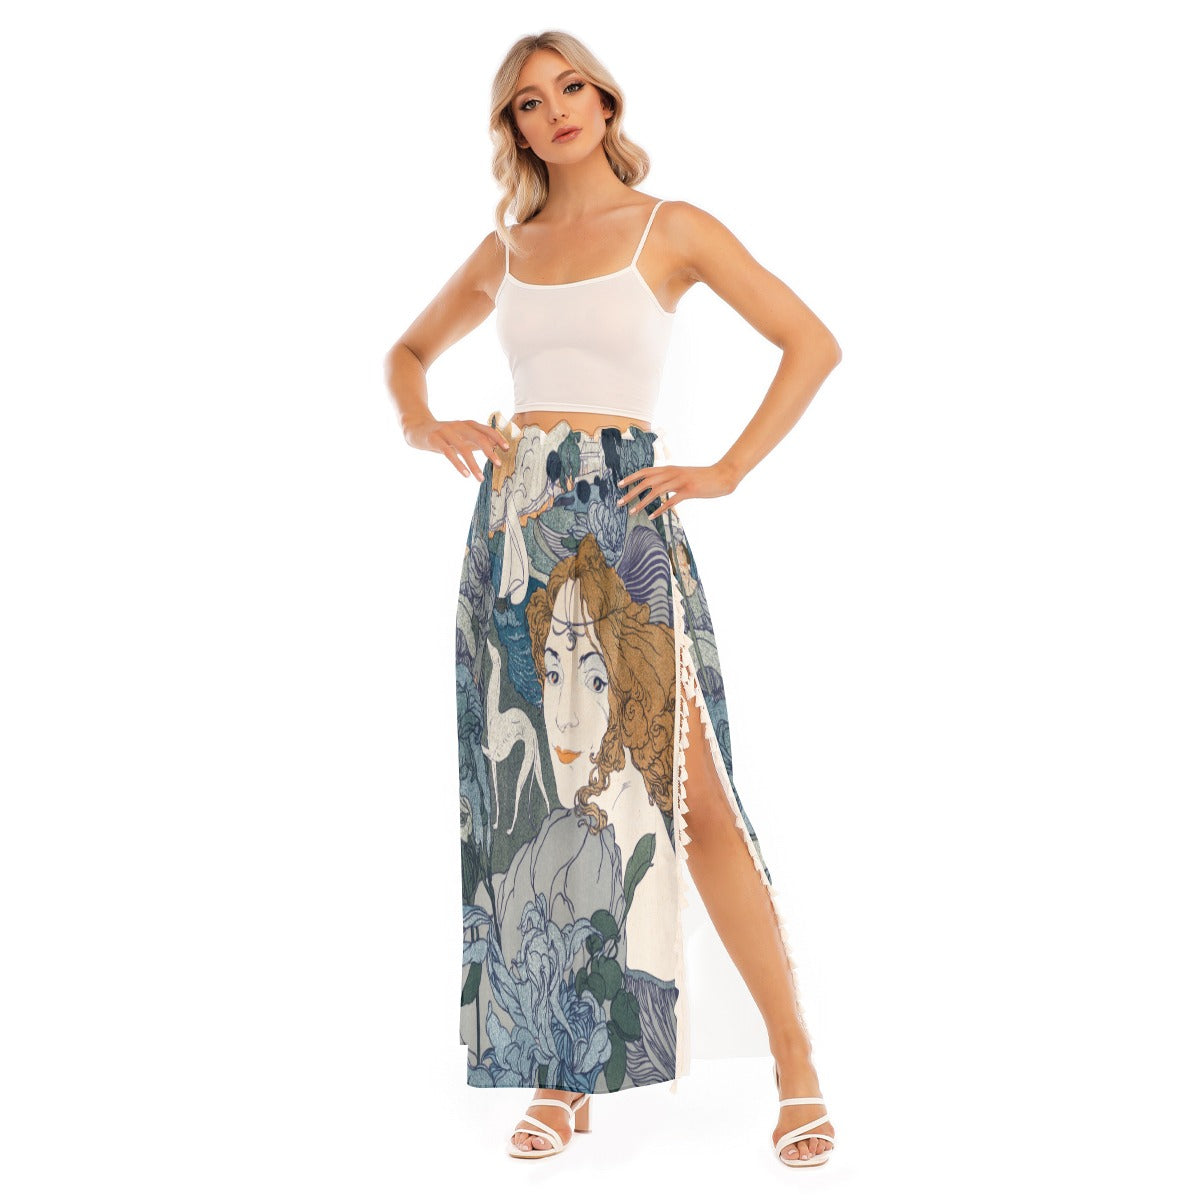 Enchanted Fashion - Mystical Skirt for Ethereal Sojourns